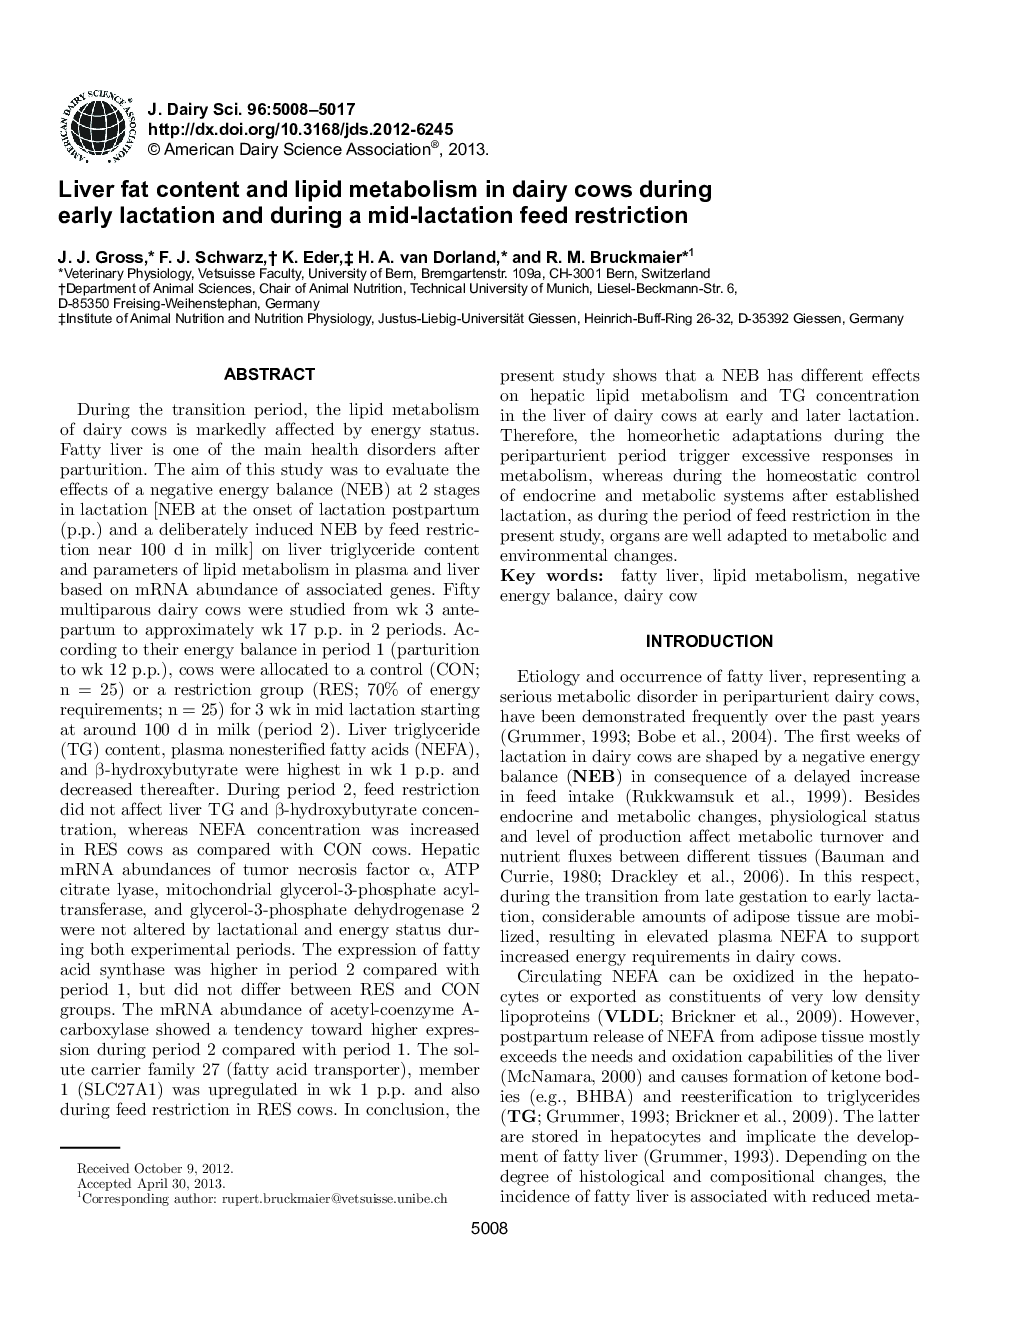 Liver fat content and lipid metabolism in dairy cows during early lactation and during a mid-lactation feed restriction